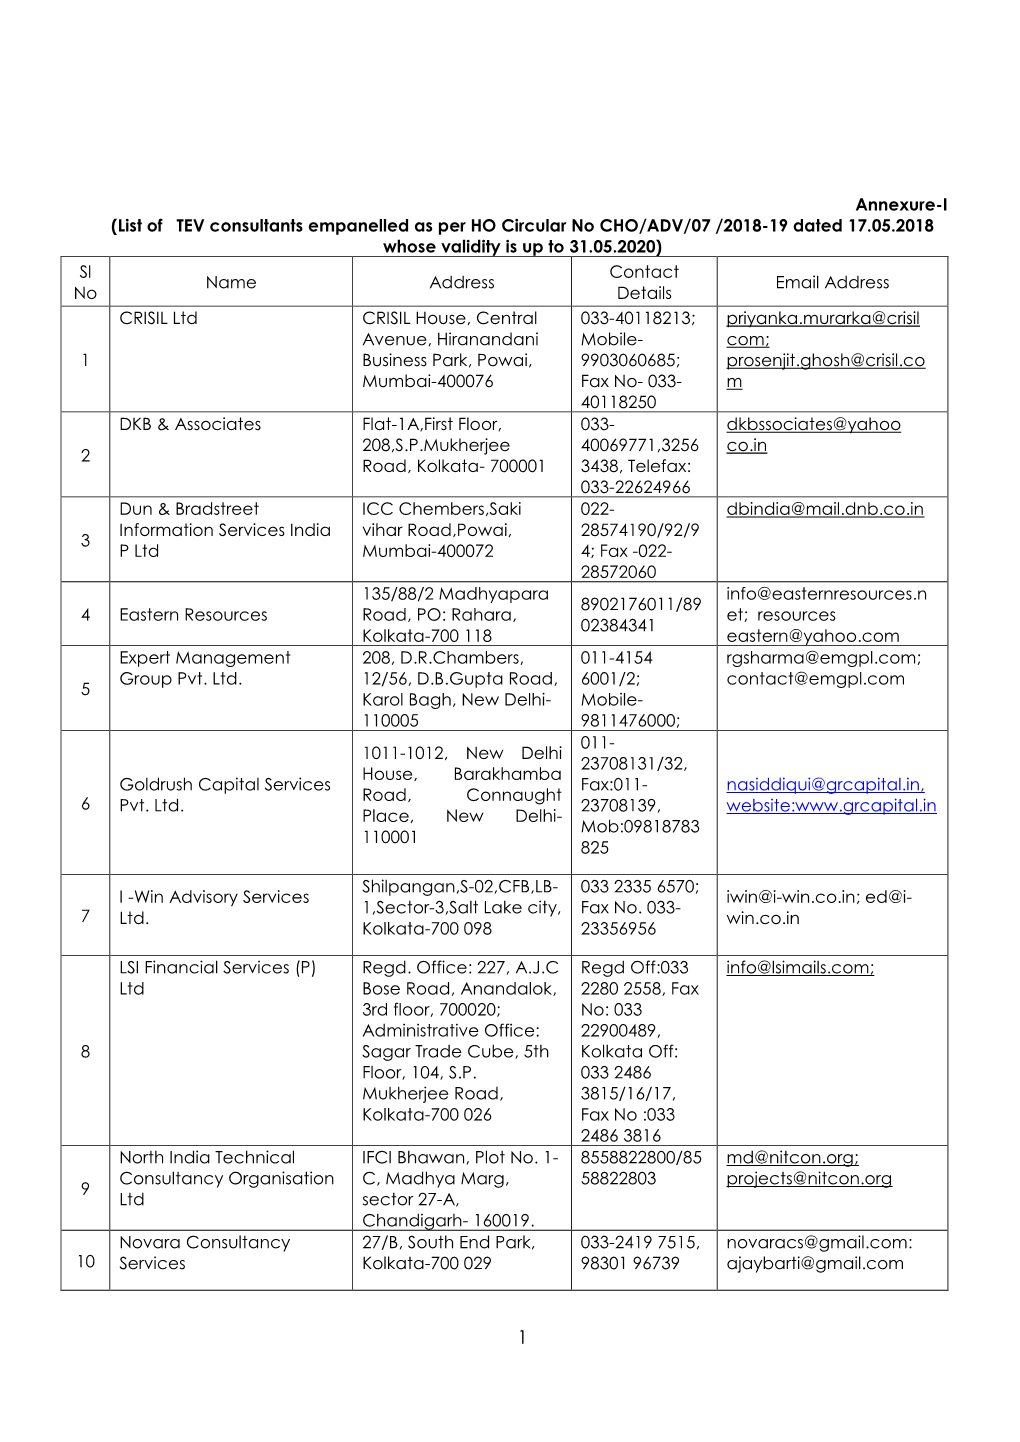 Annexure-I (List of TEV Consultants Empanelled As Per HO Circular No